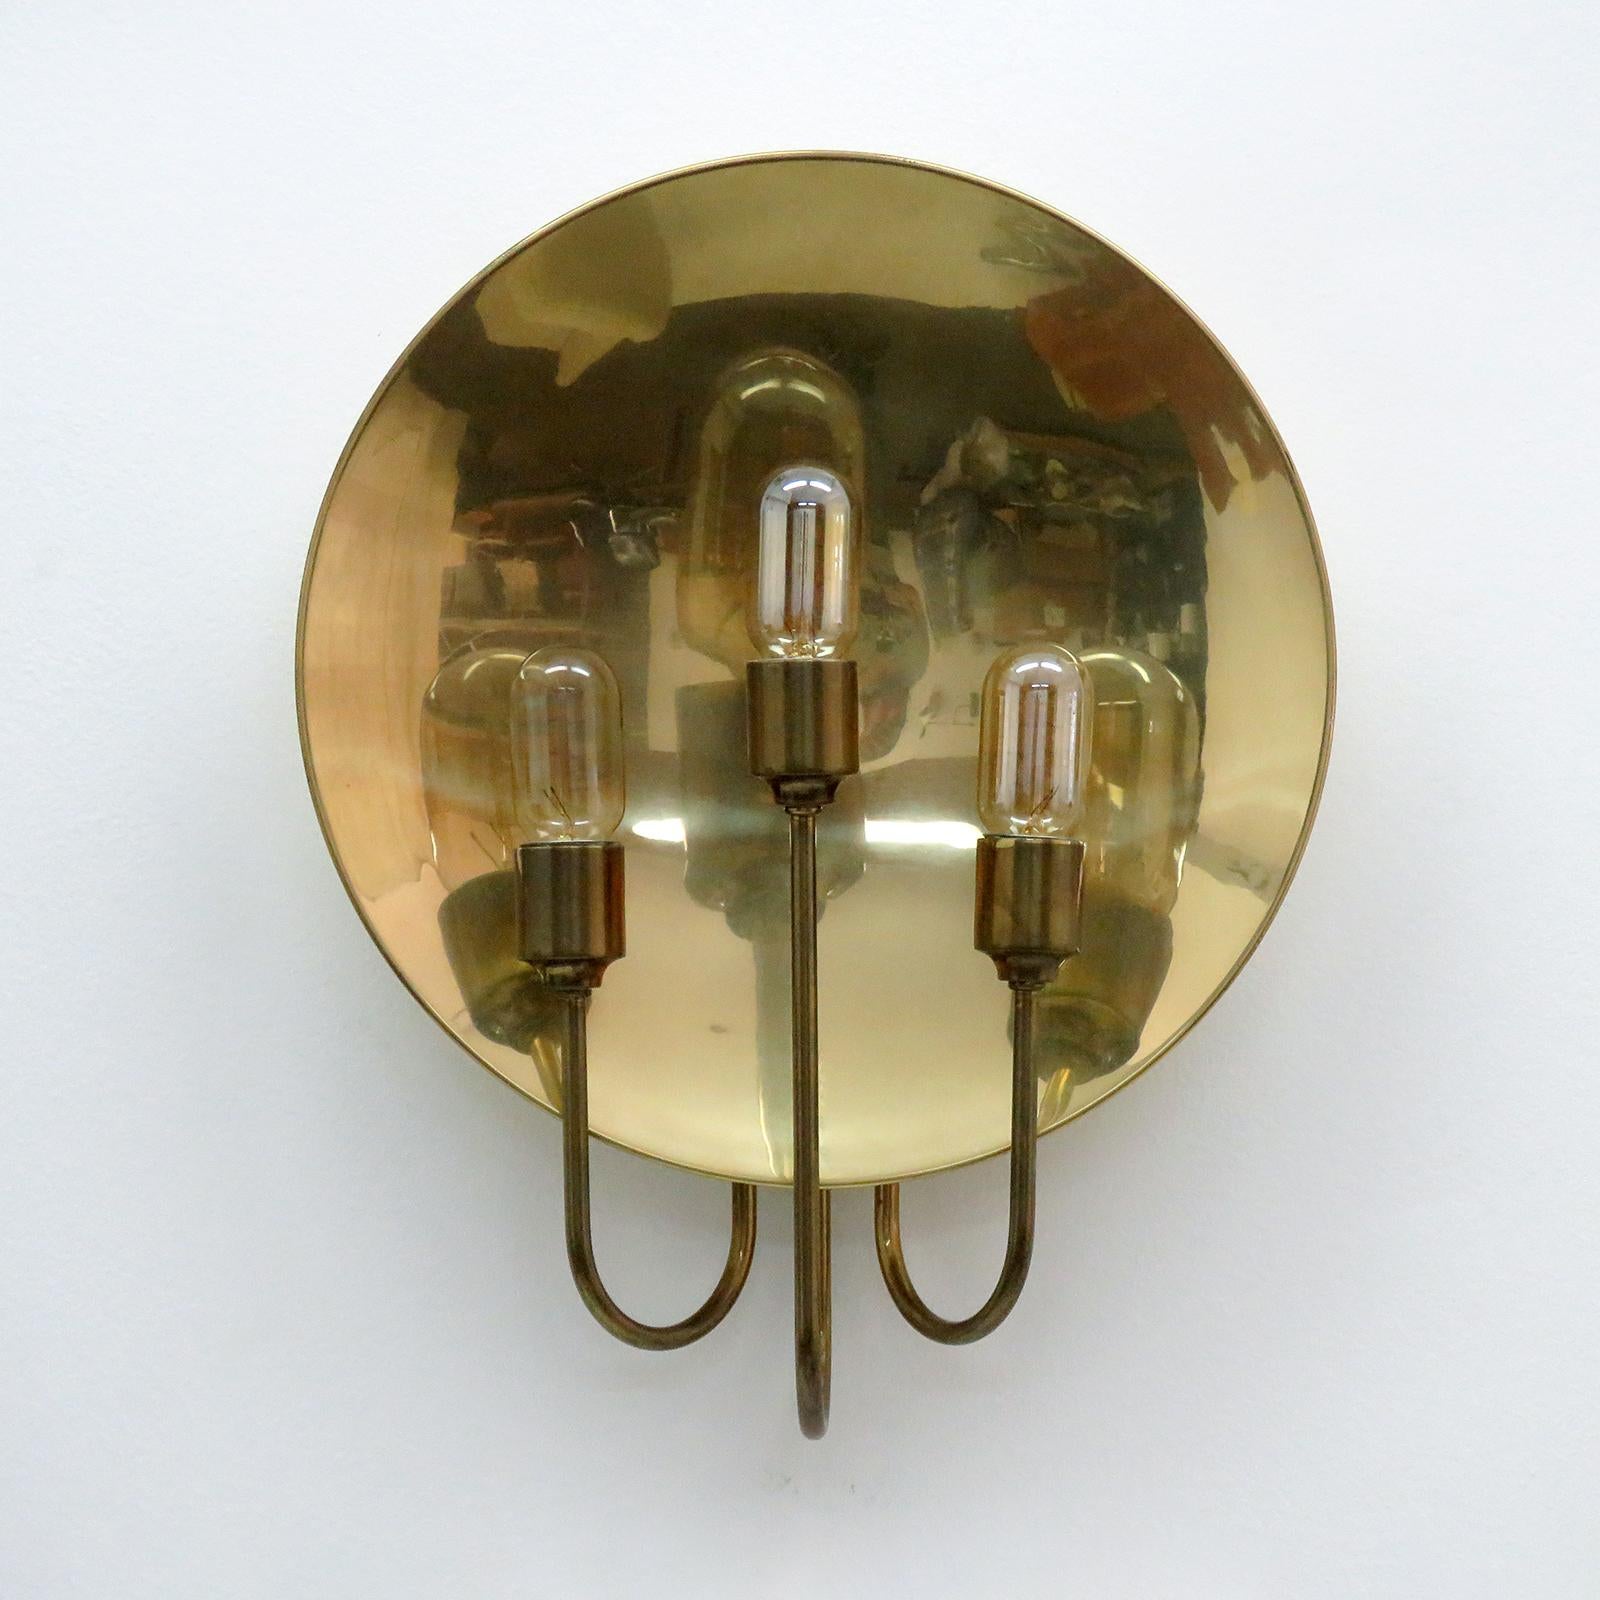 wonderful 3-arm brass wall light designed by Florian Schulz, Germany, 1960 with three light sources in front of a circular brass reflector, wired for US standards, three E27 sockets, max. wattage 60w each, bulbs provided as a onetime courtesy.